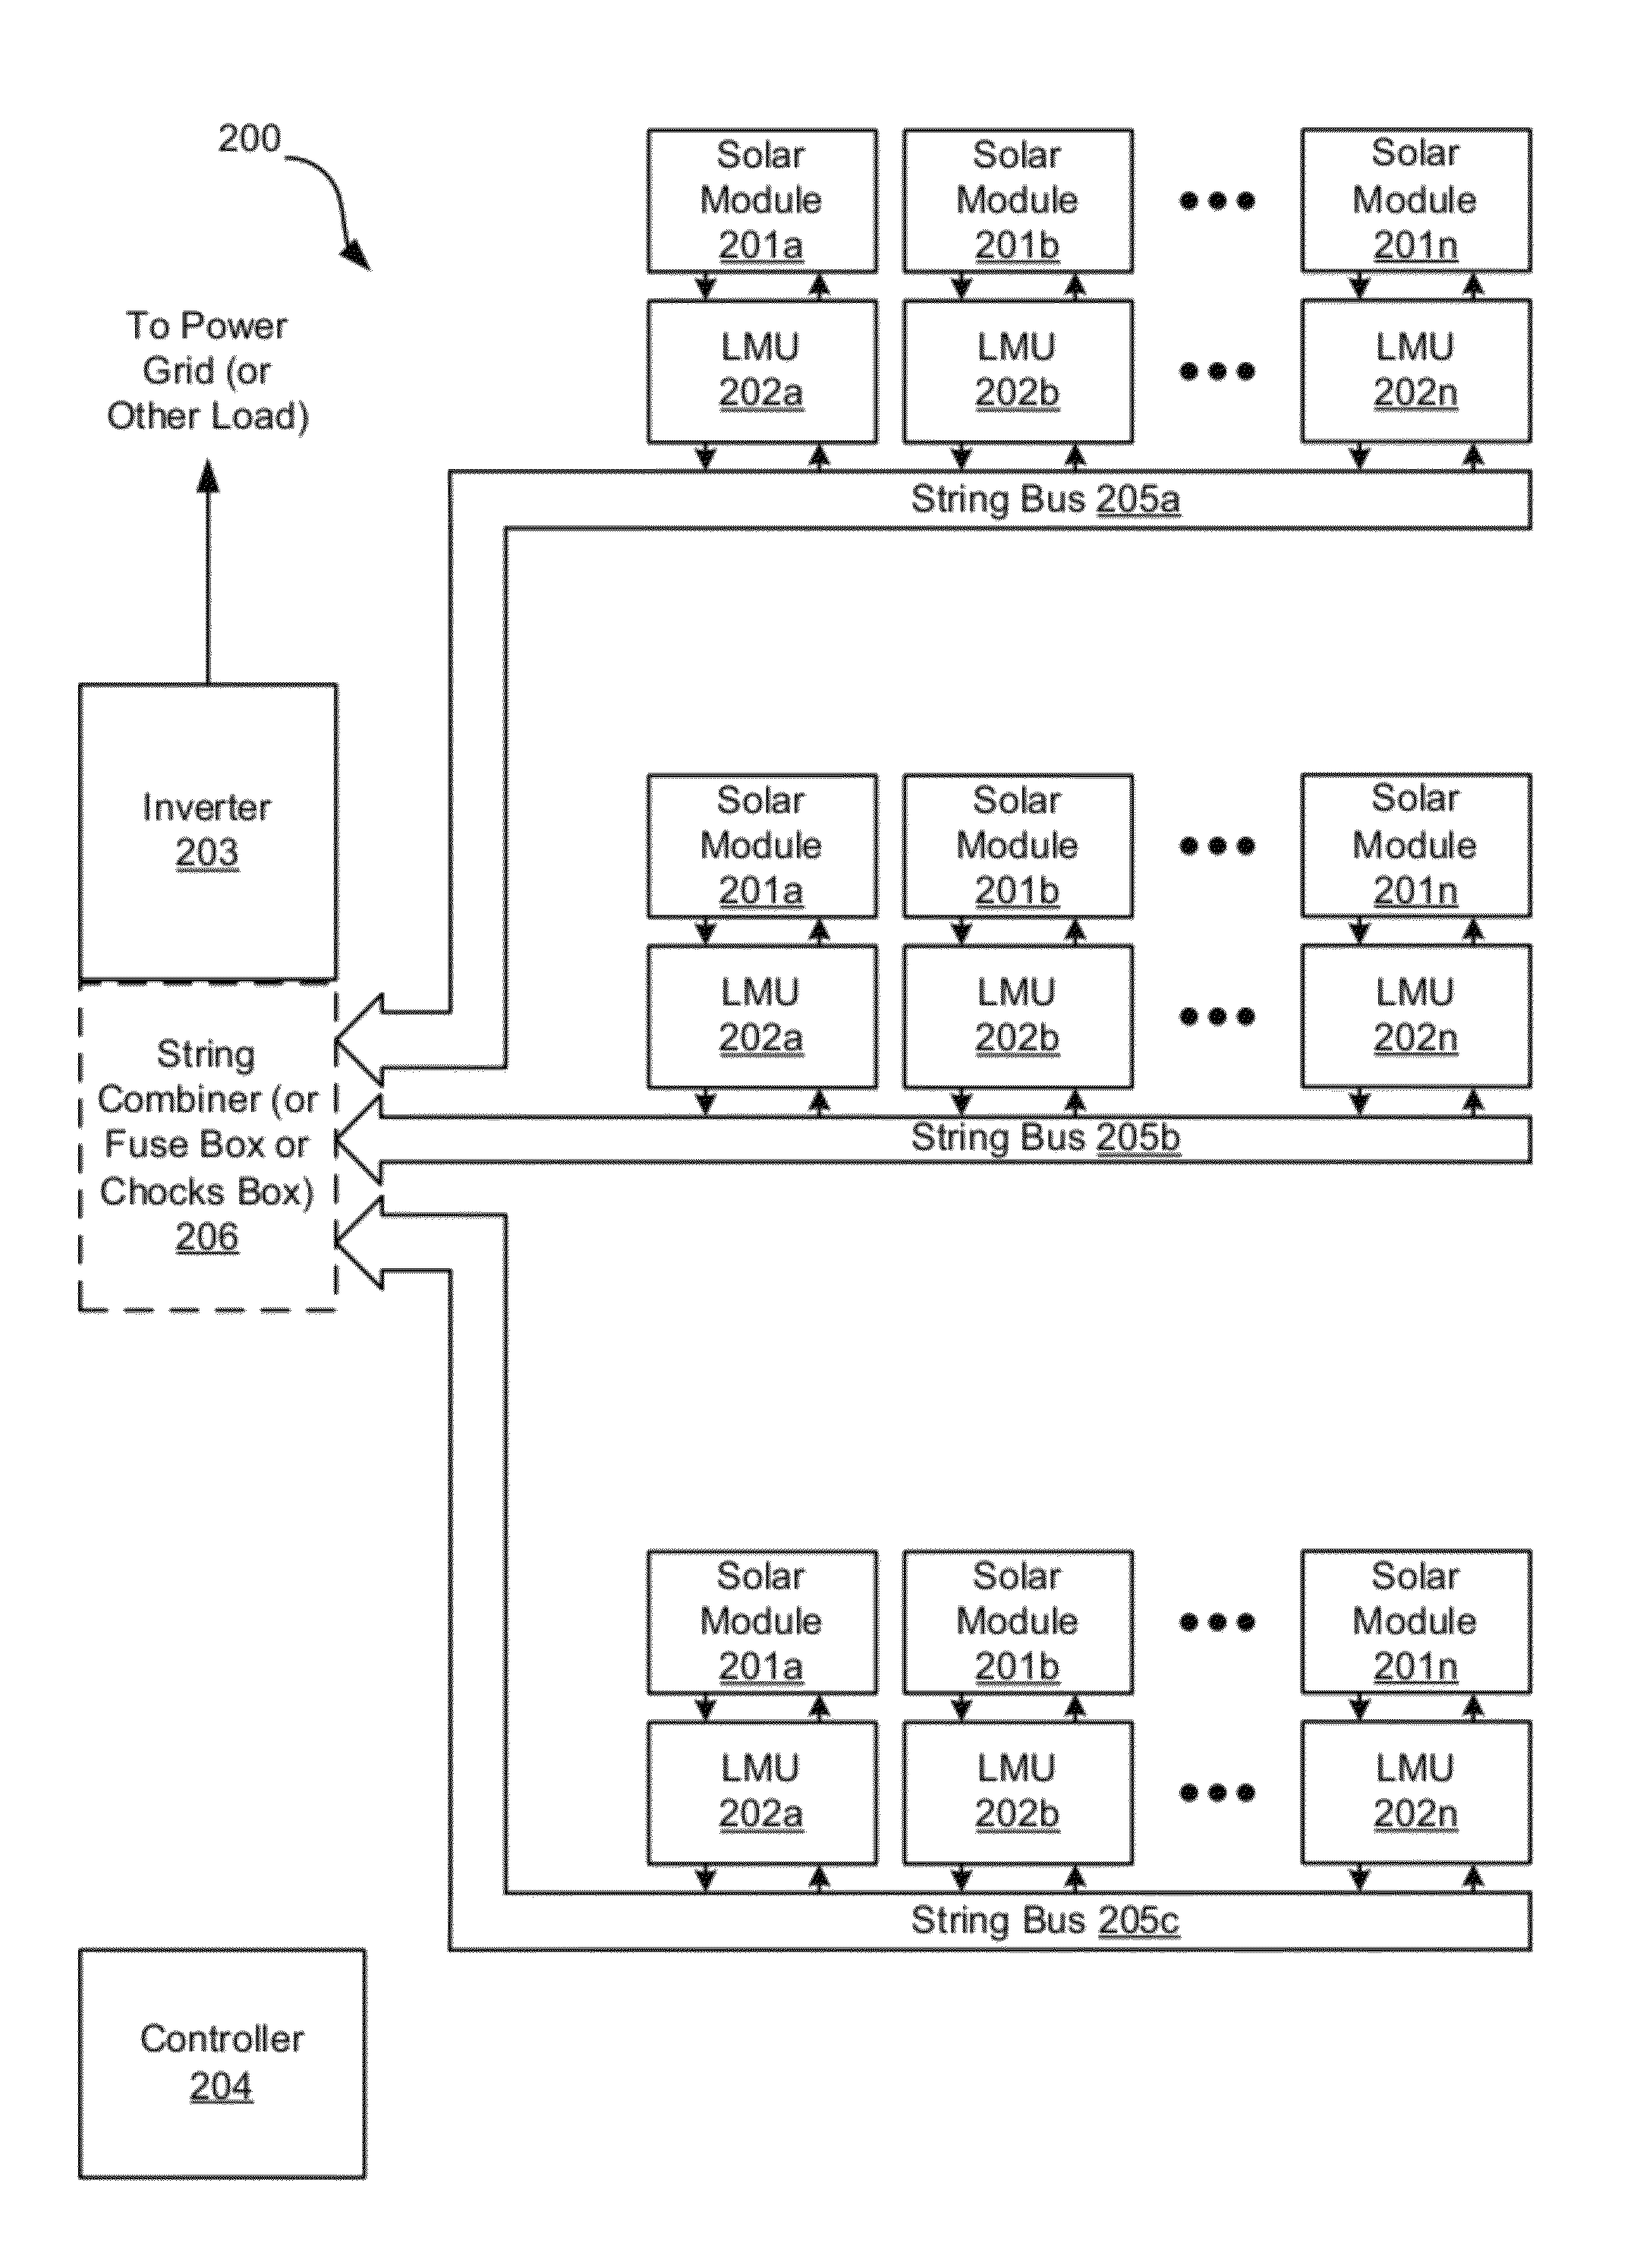 Enhanced systems and methods for using a power converter for balancing modules in single-string and multi-string configurations